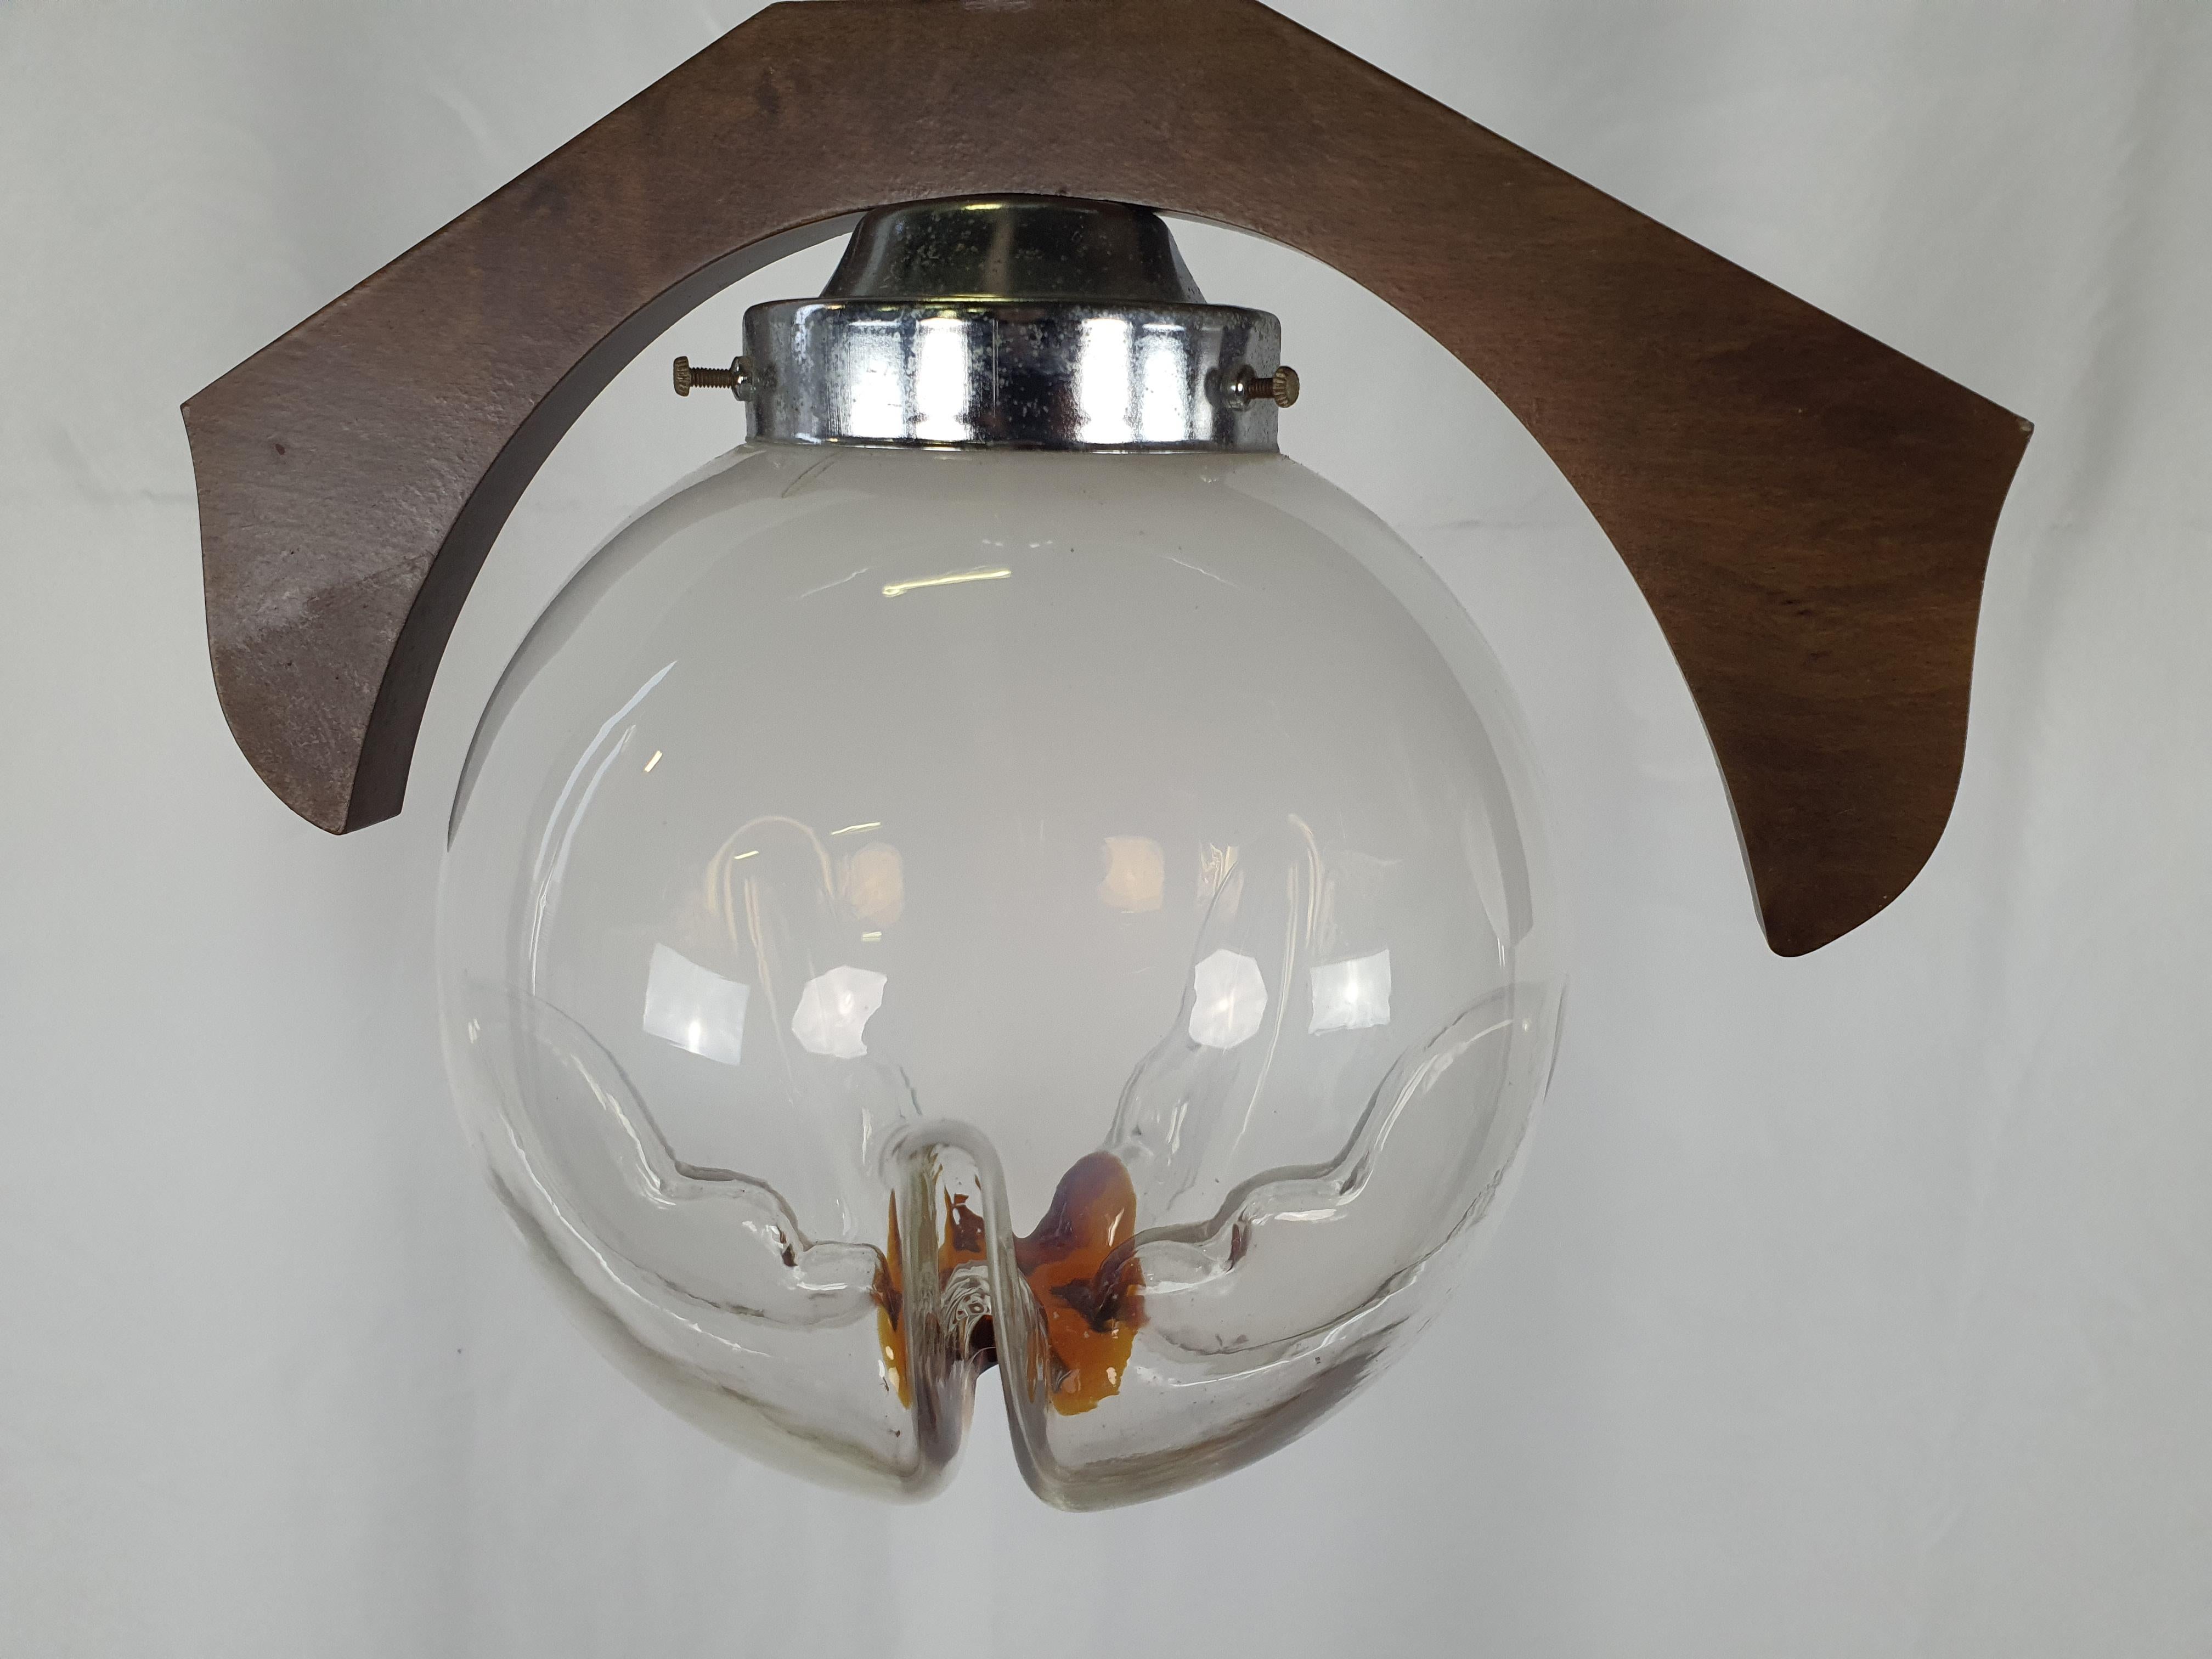 Particular chandelier of Italian production, Mazzega design circa 1970s.

The cable of this item is original and the replacement of electrical parts and/or the electrical system is recommended.